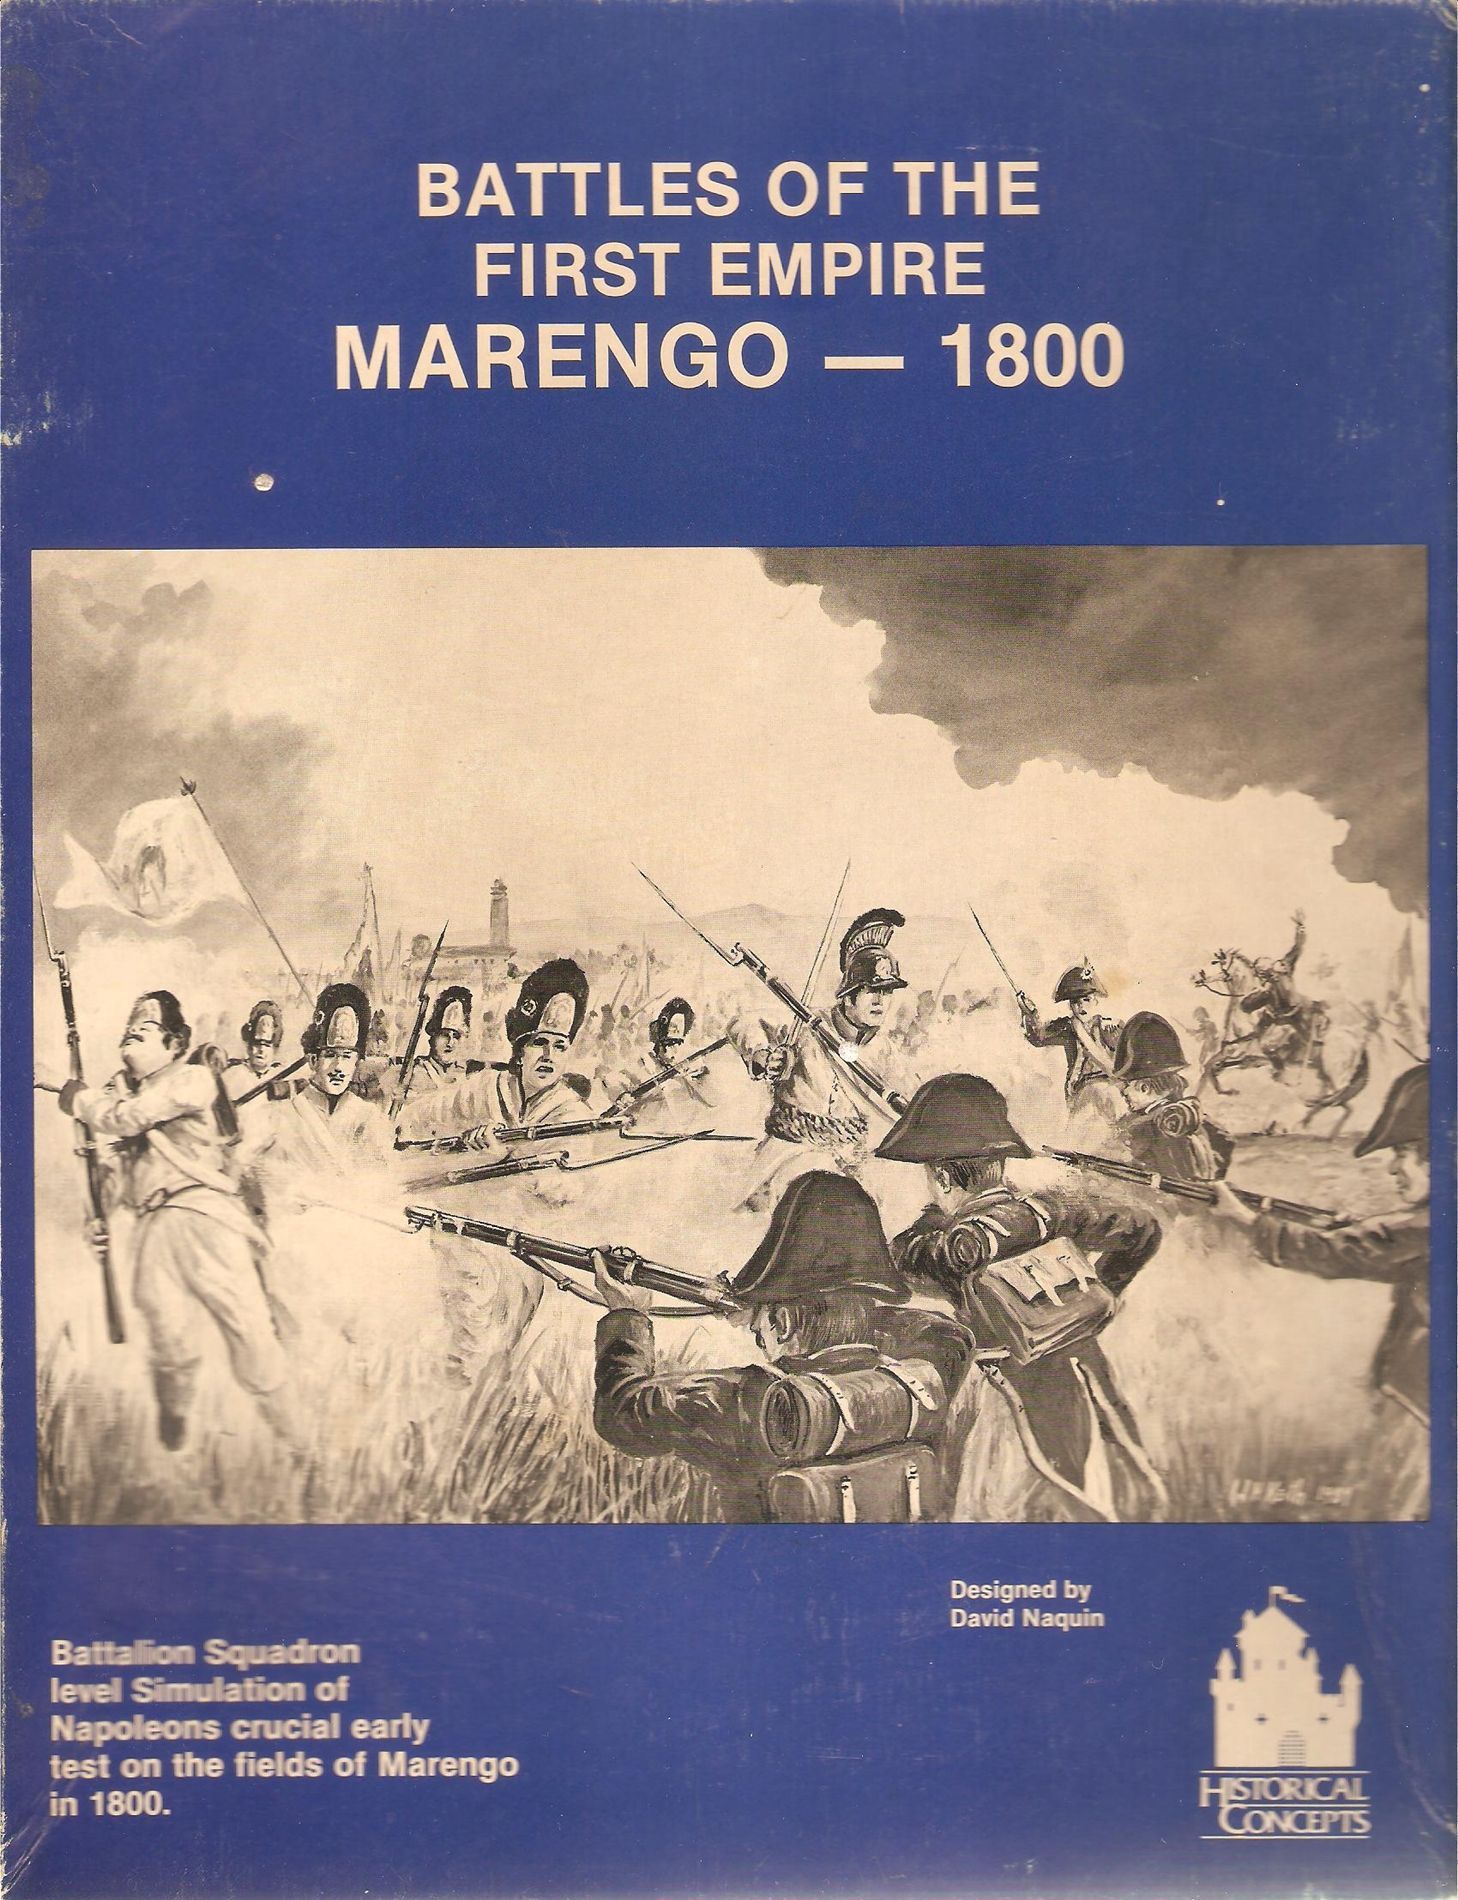 Battles of the First Empire: Marengo